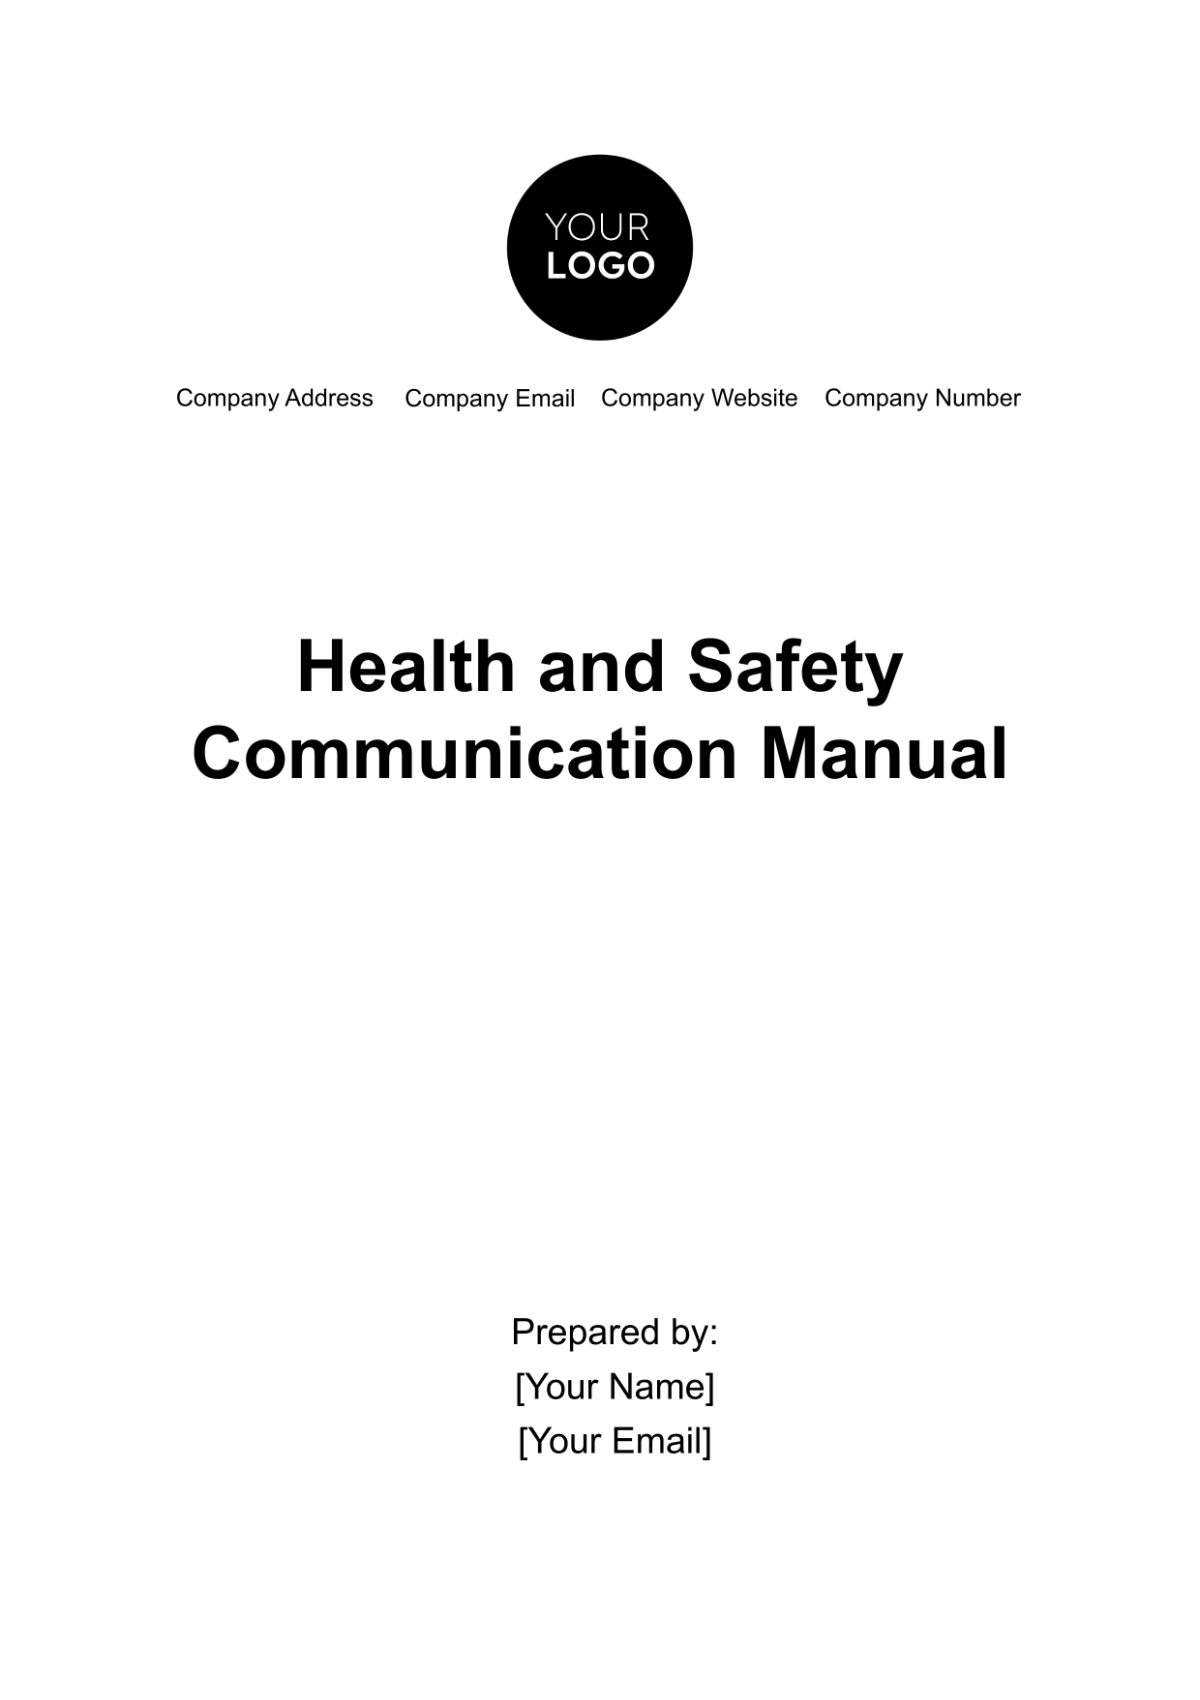 Health & Safety Communication Manual Template